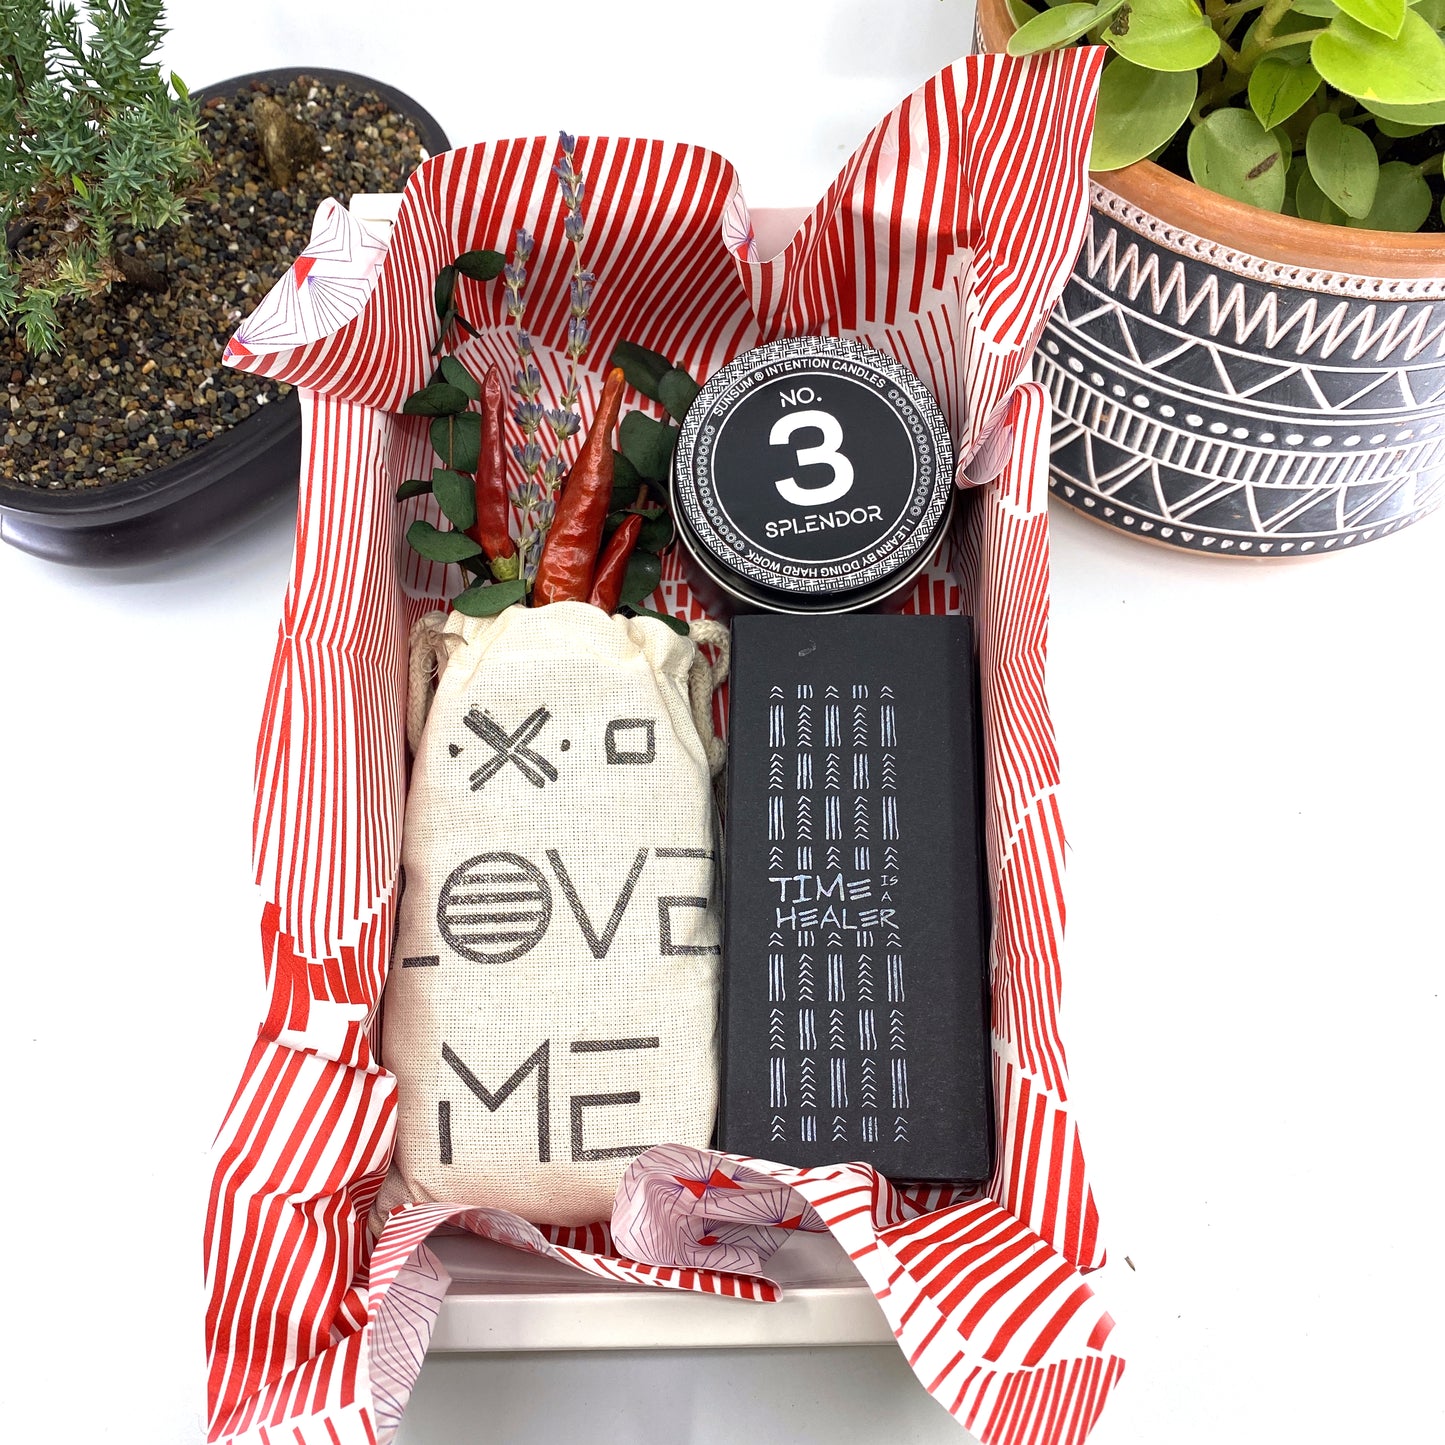 Words of Affirmation, Love Me, Dried Flower Bouquet & Self-Care, Gift Set Sunsum®